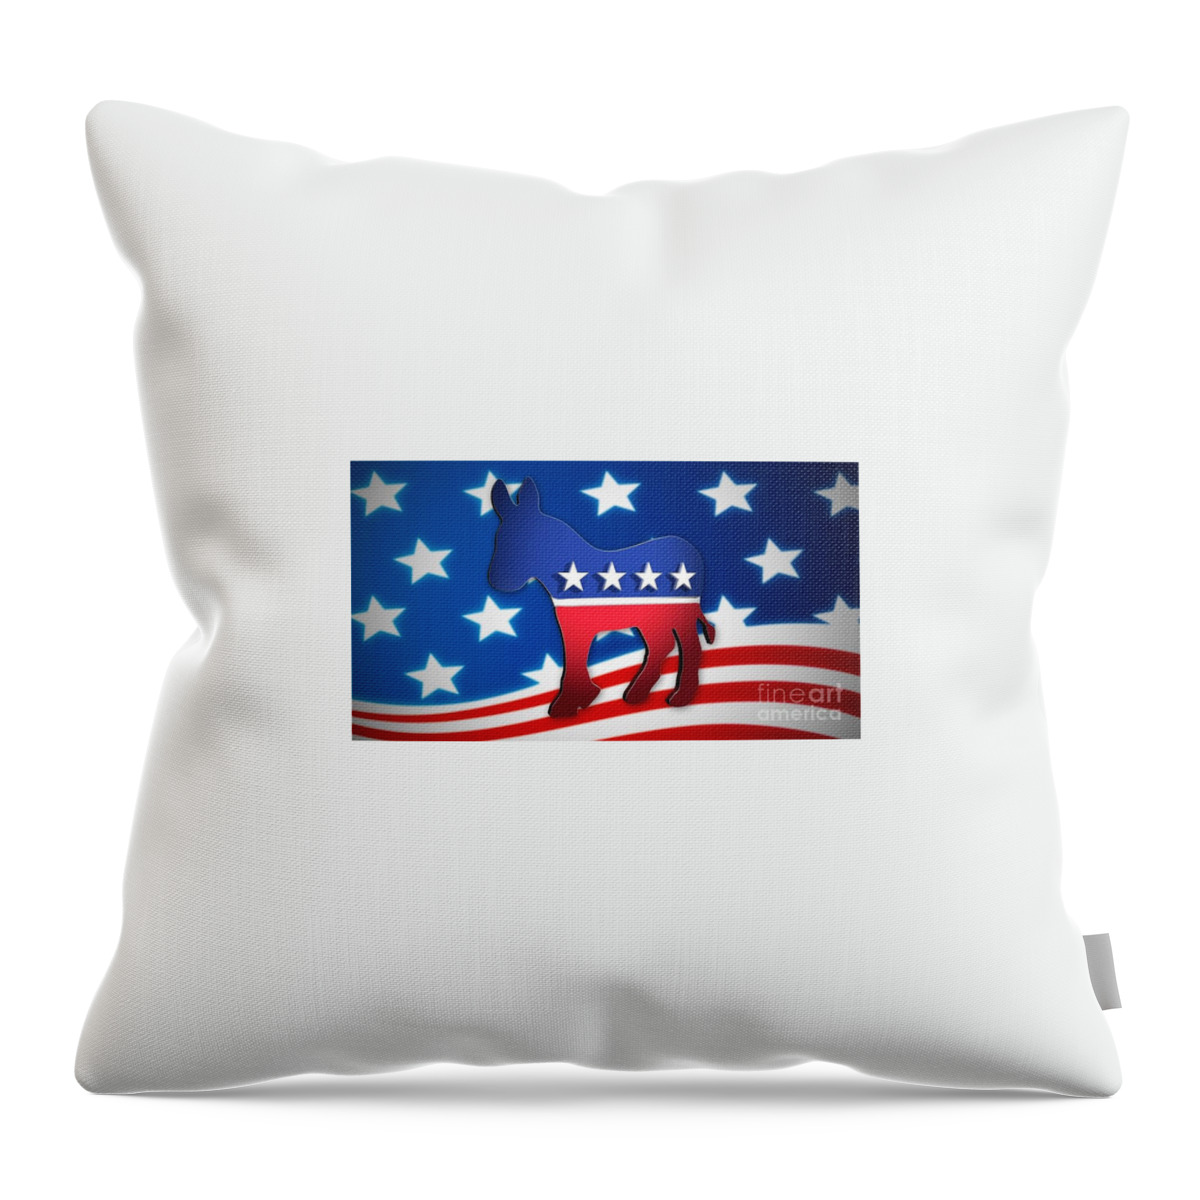 Democrat Throw Pillow featuring the photograph Democrat Poster by Action